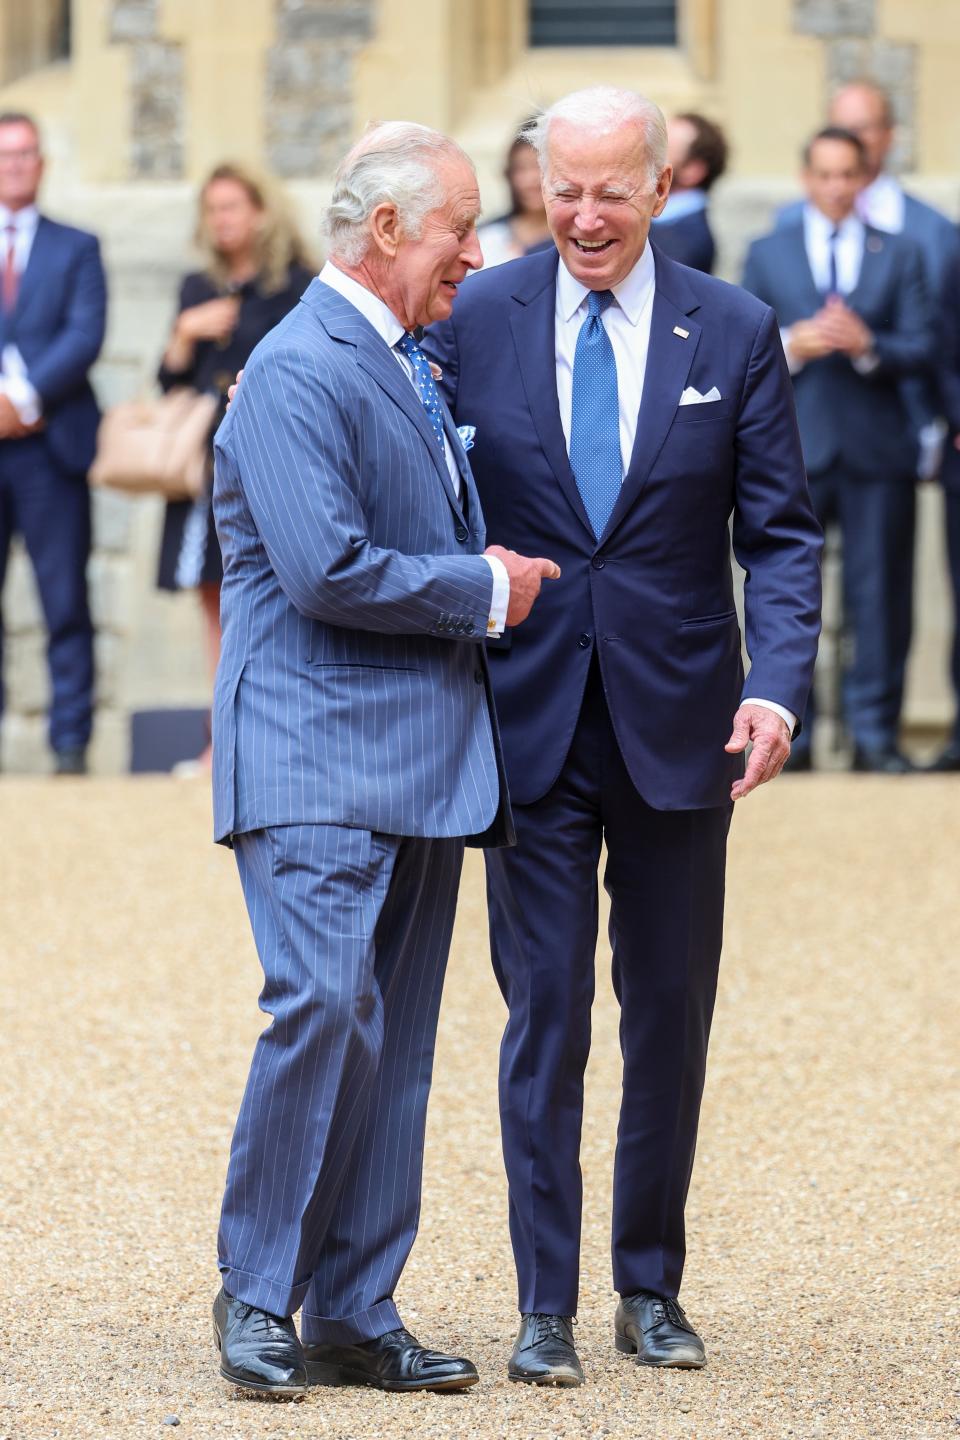 King Charles III and the president of the United States, Joe Biden laughing in the Quadrangle at Windsor Castle (Chris Jackson/Getty Images)